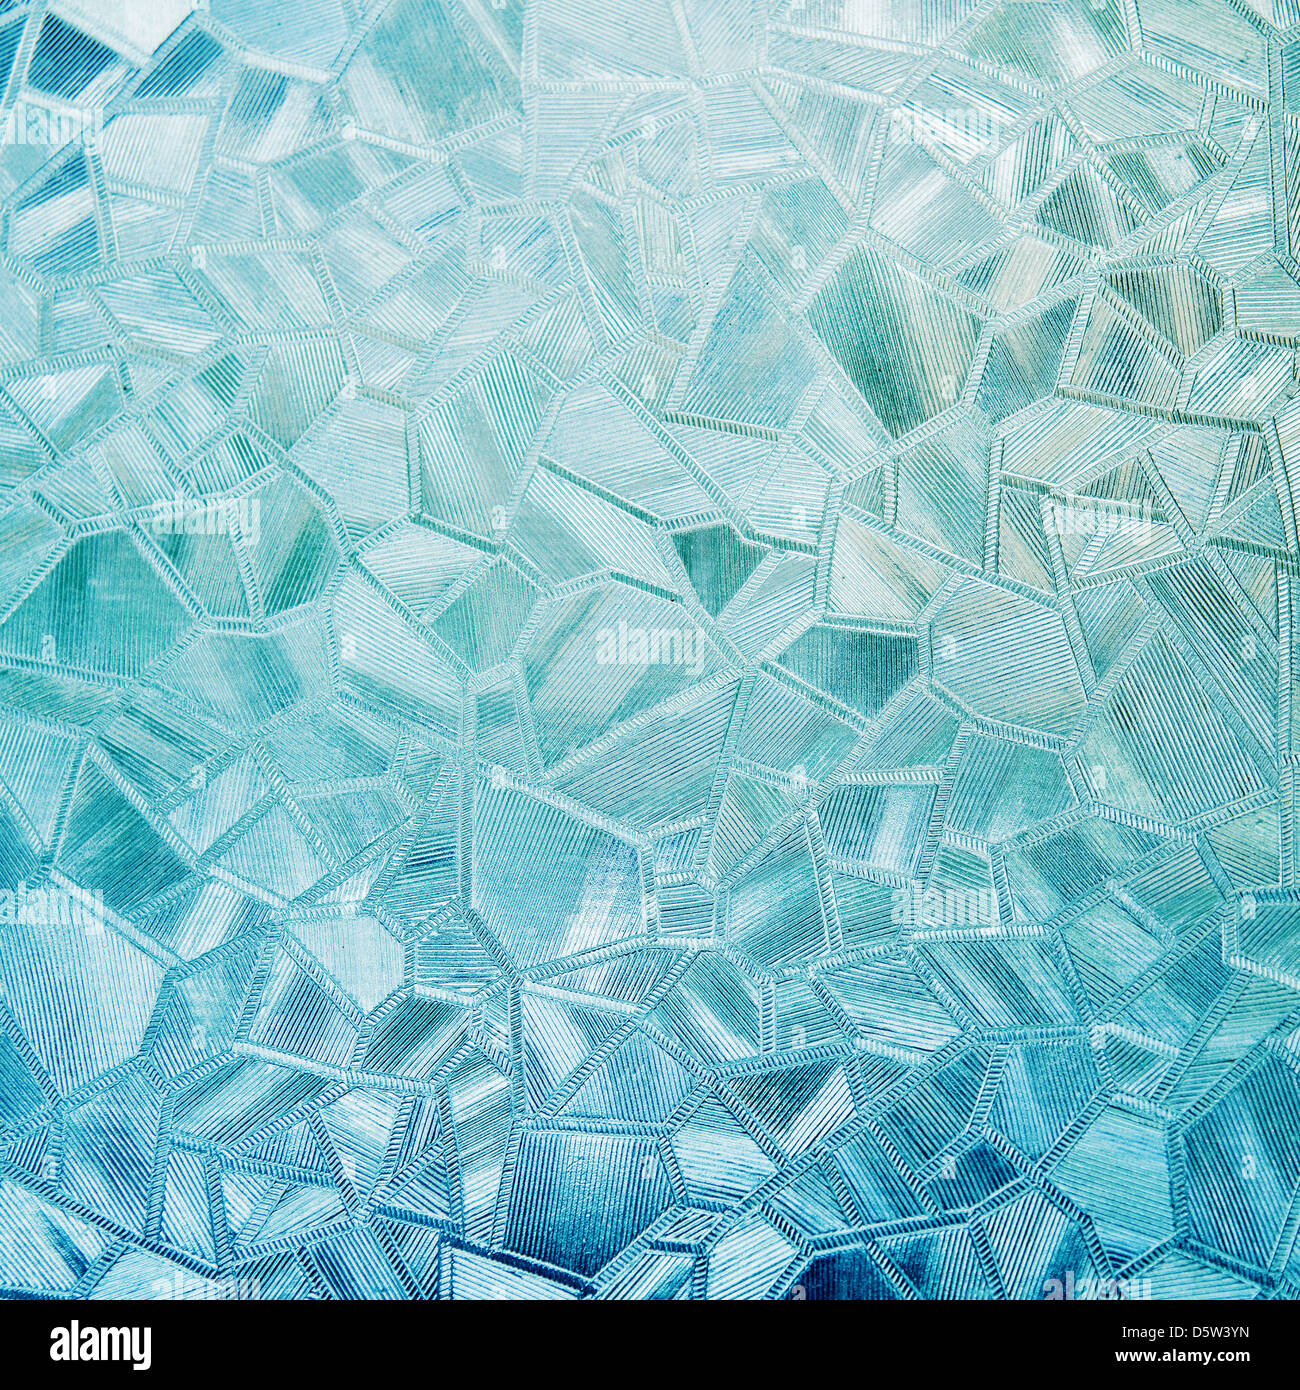 Soft glass texture for background. Stock Photo